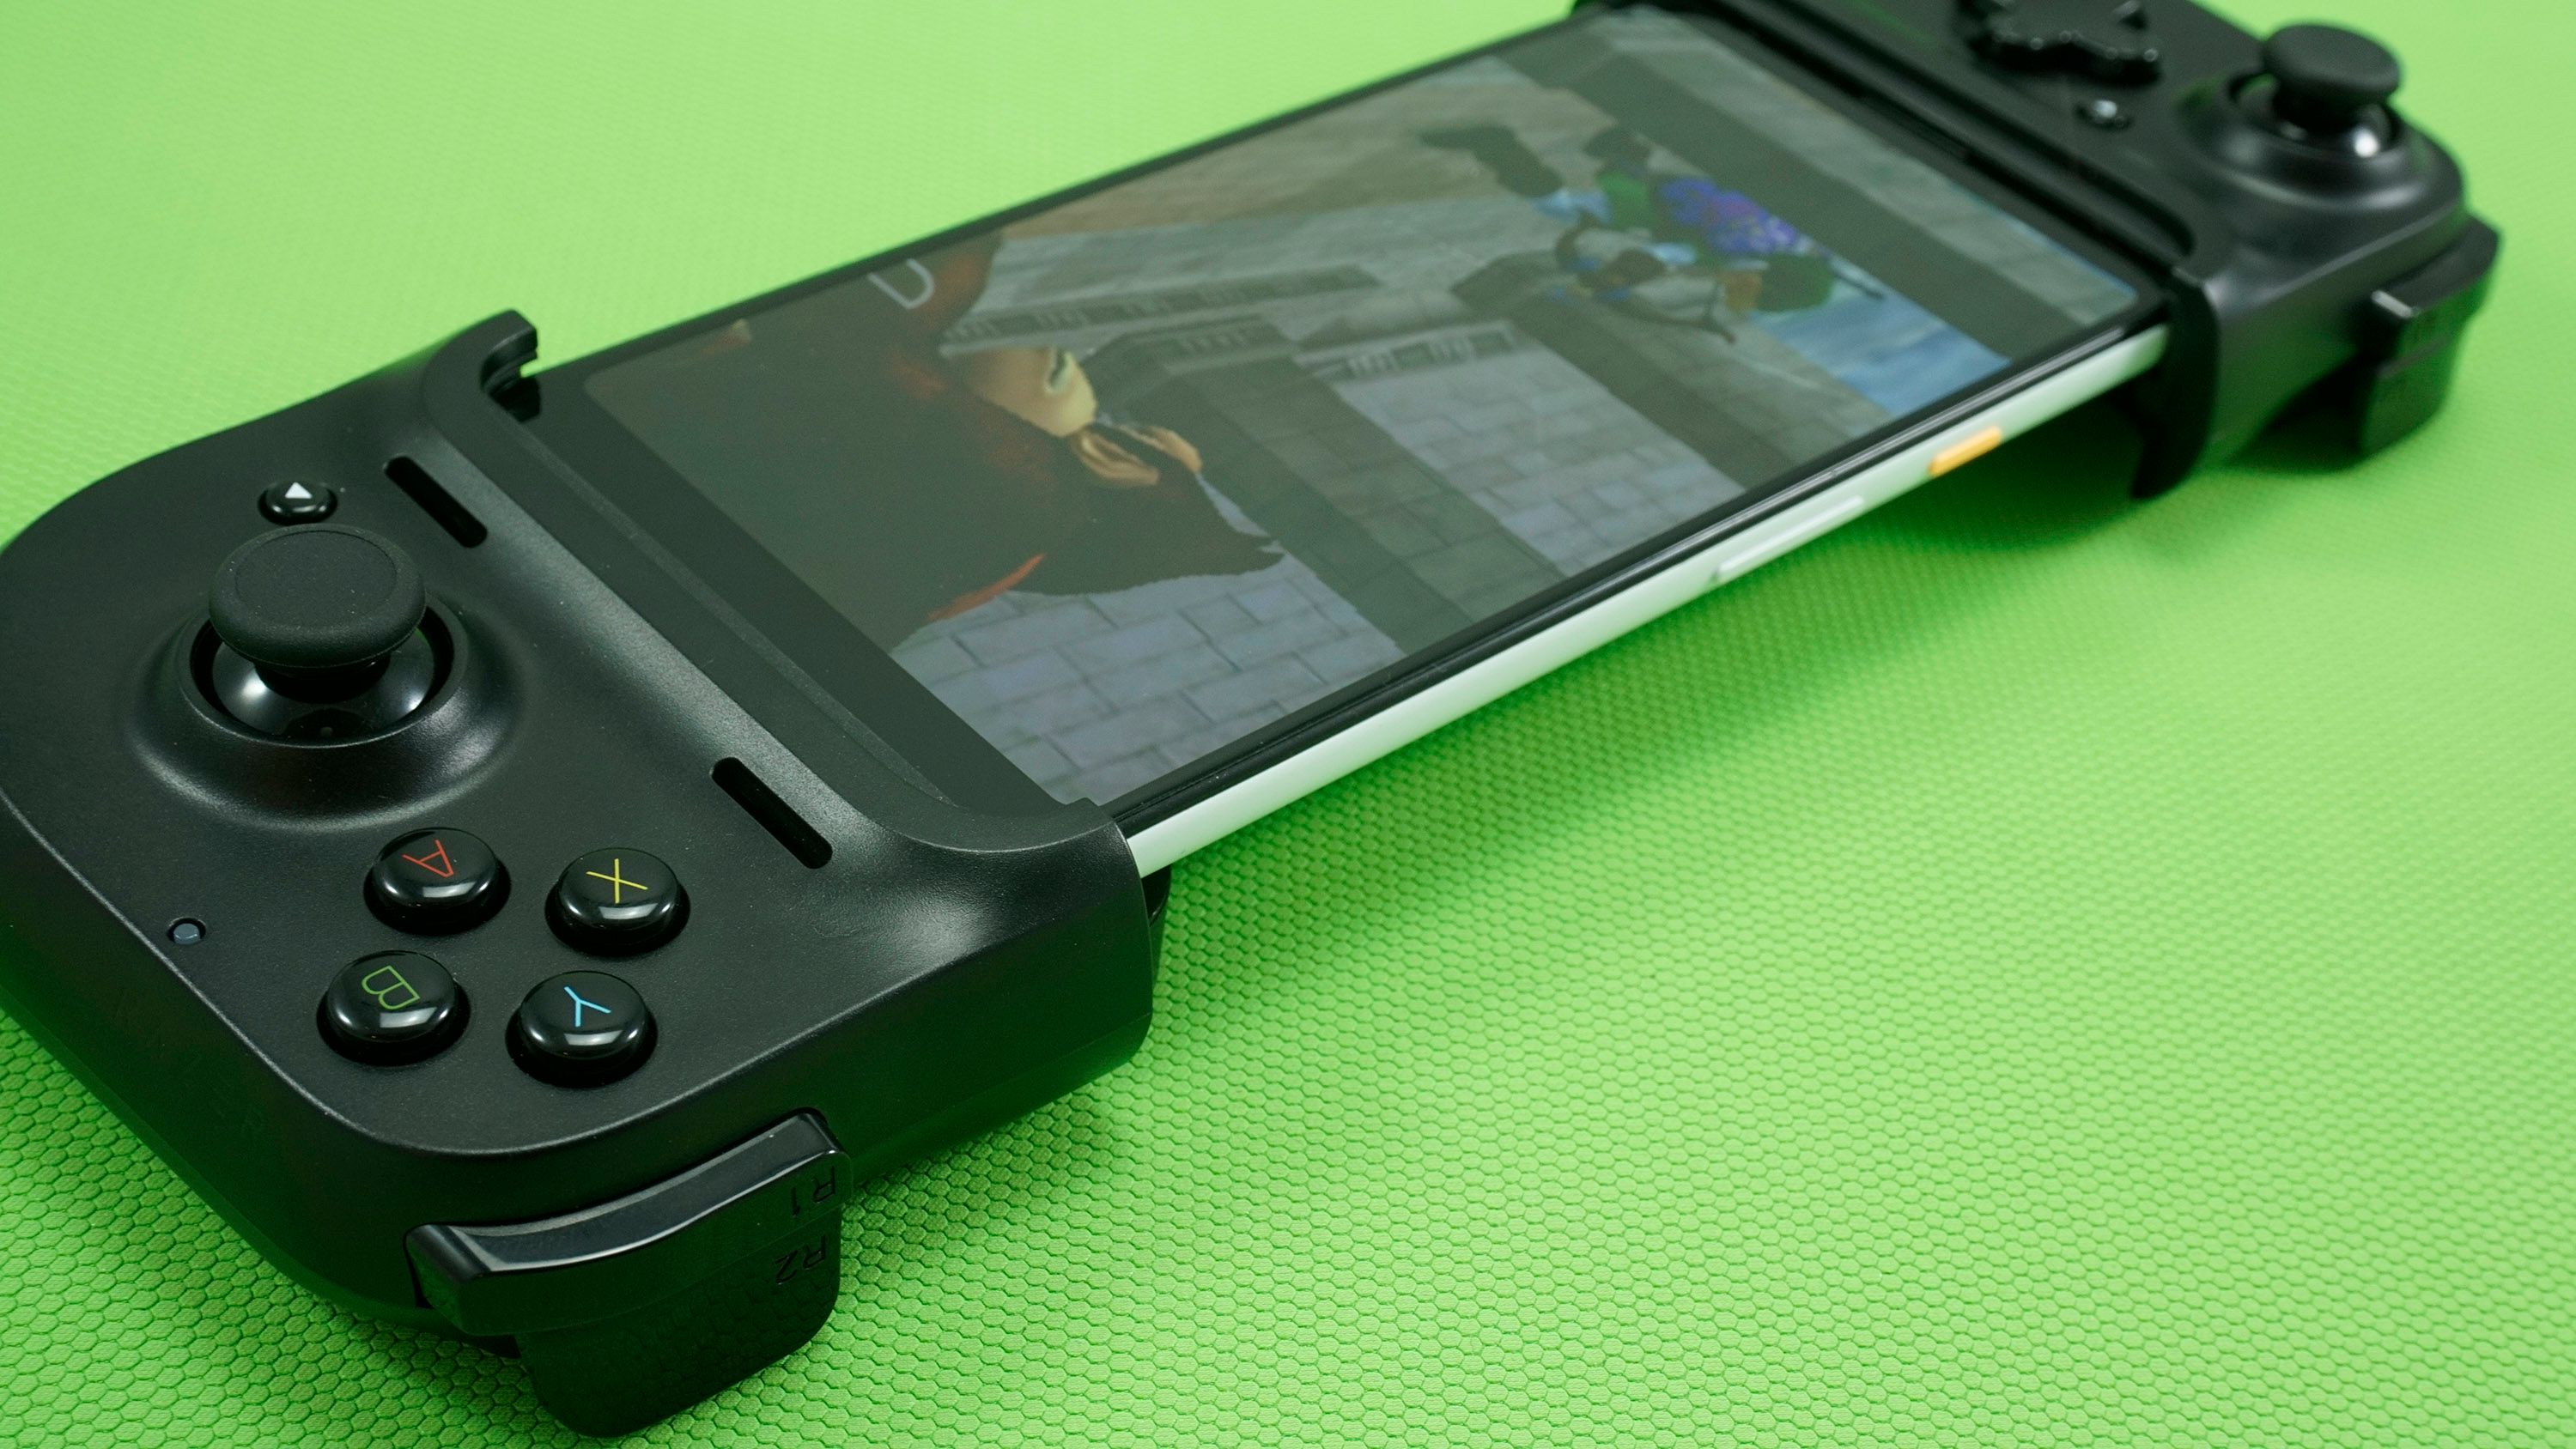 Razer Kishi Review: A Must-Have Accessory For Xbox and Android